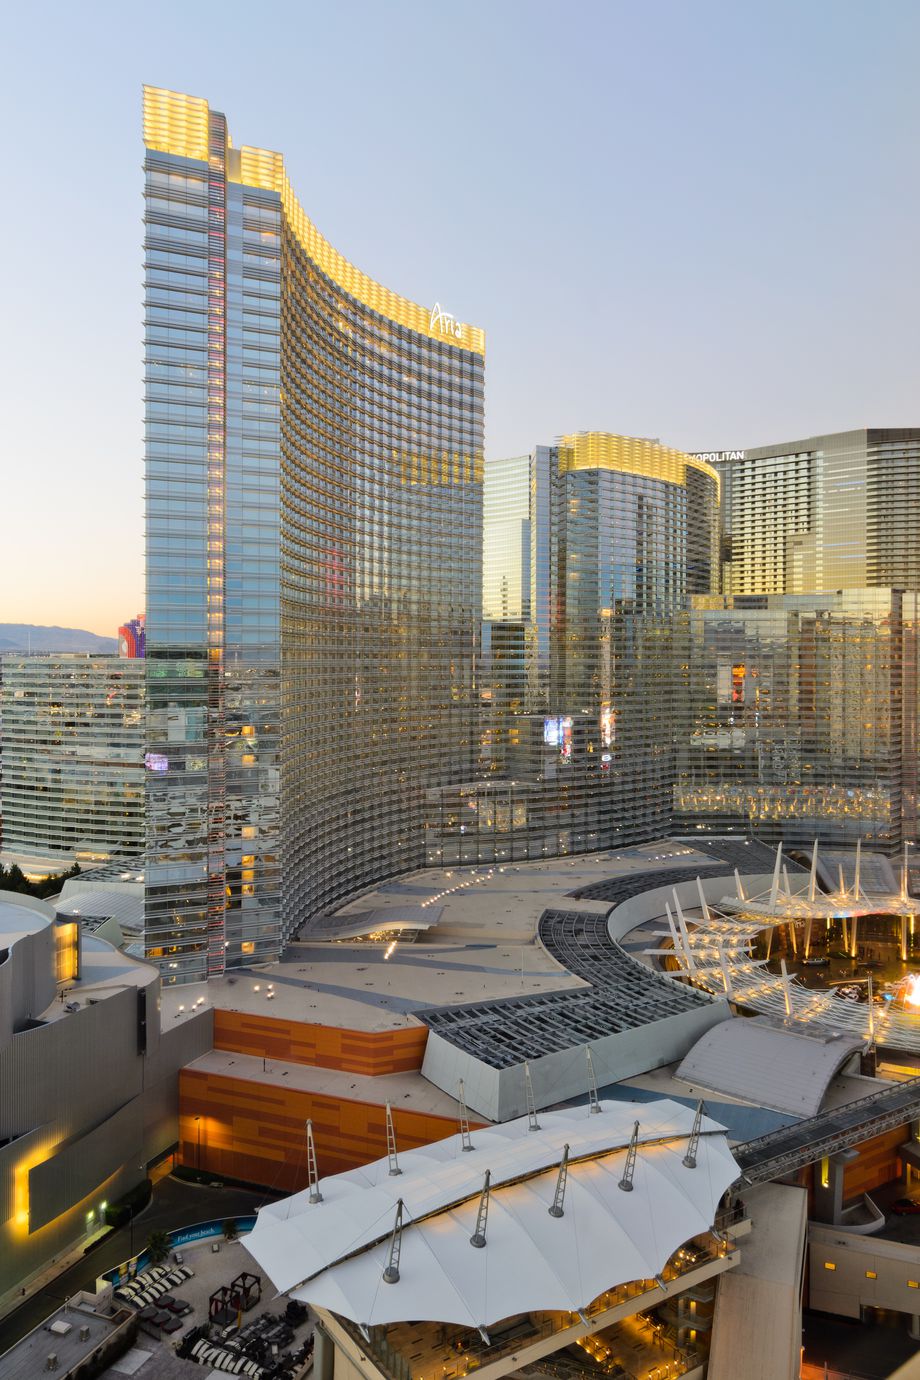 Pelli’s firm was responsible for the architectural design of the Aria Resort and Casino on the Las Vegas Strip.